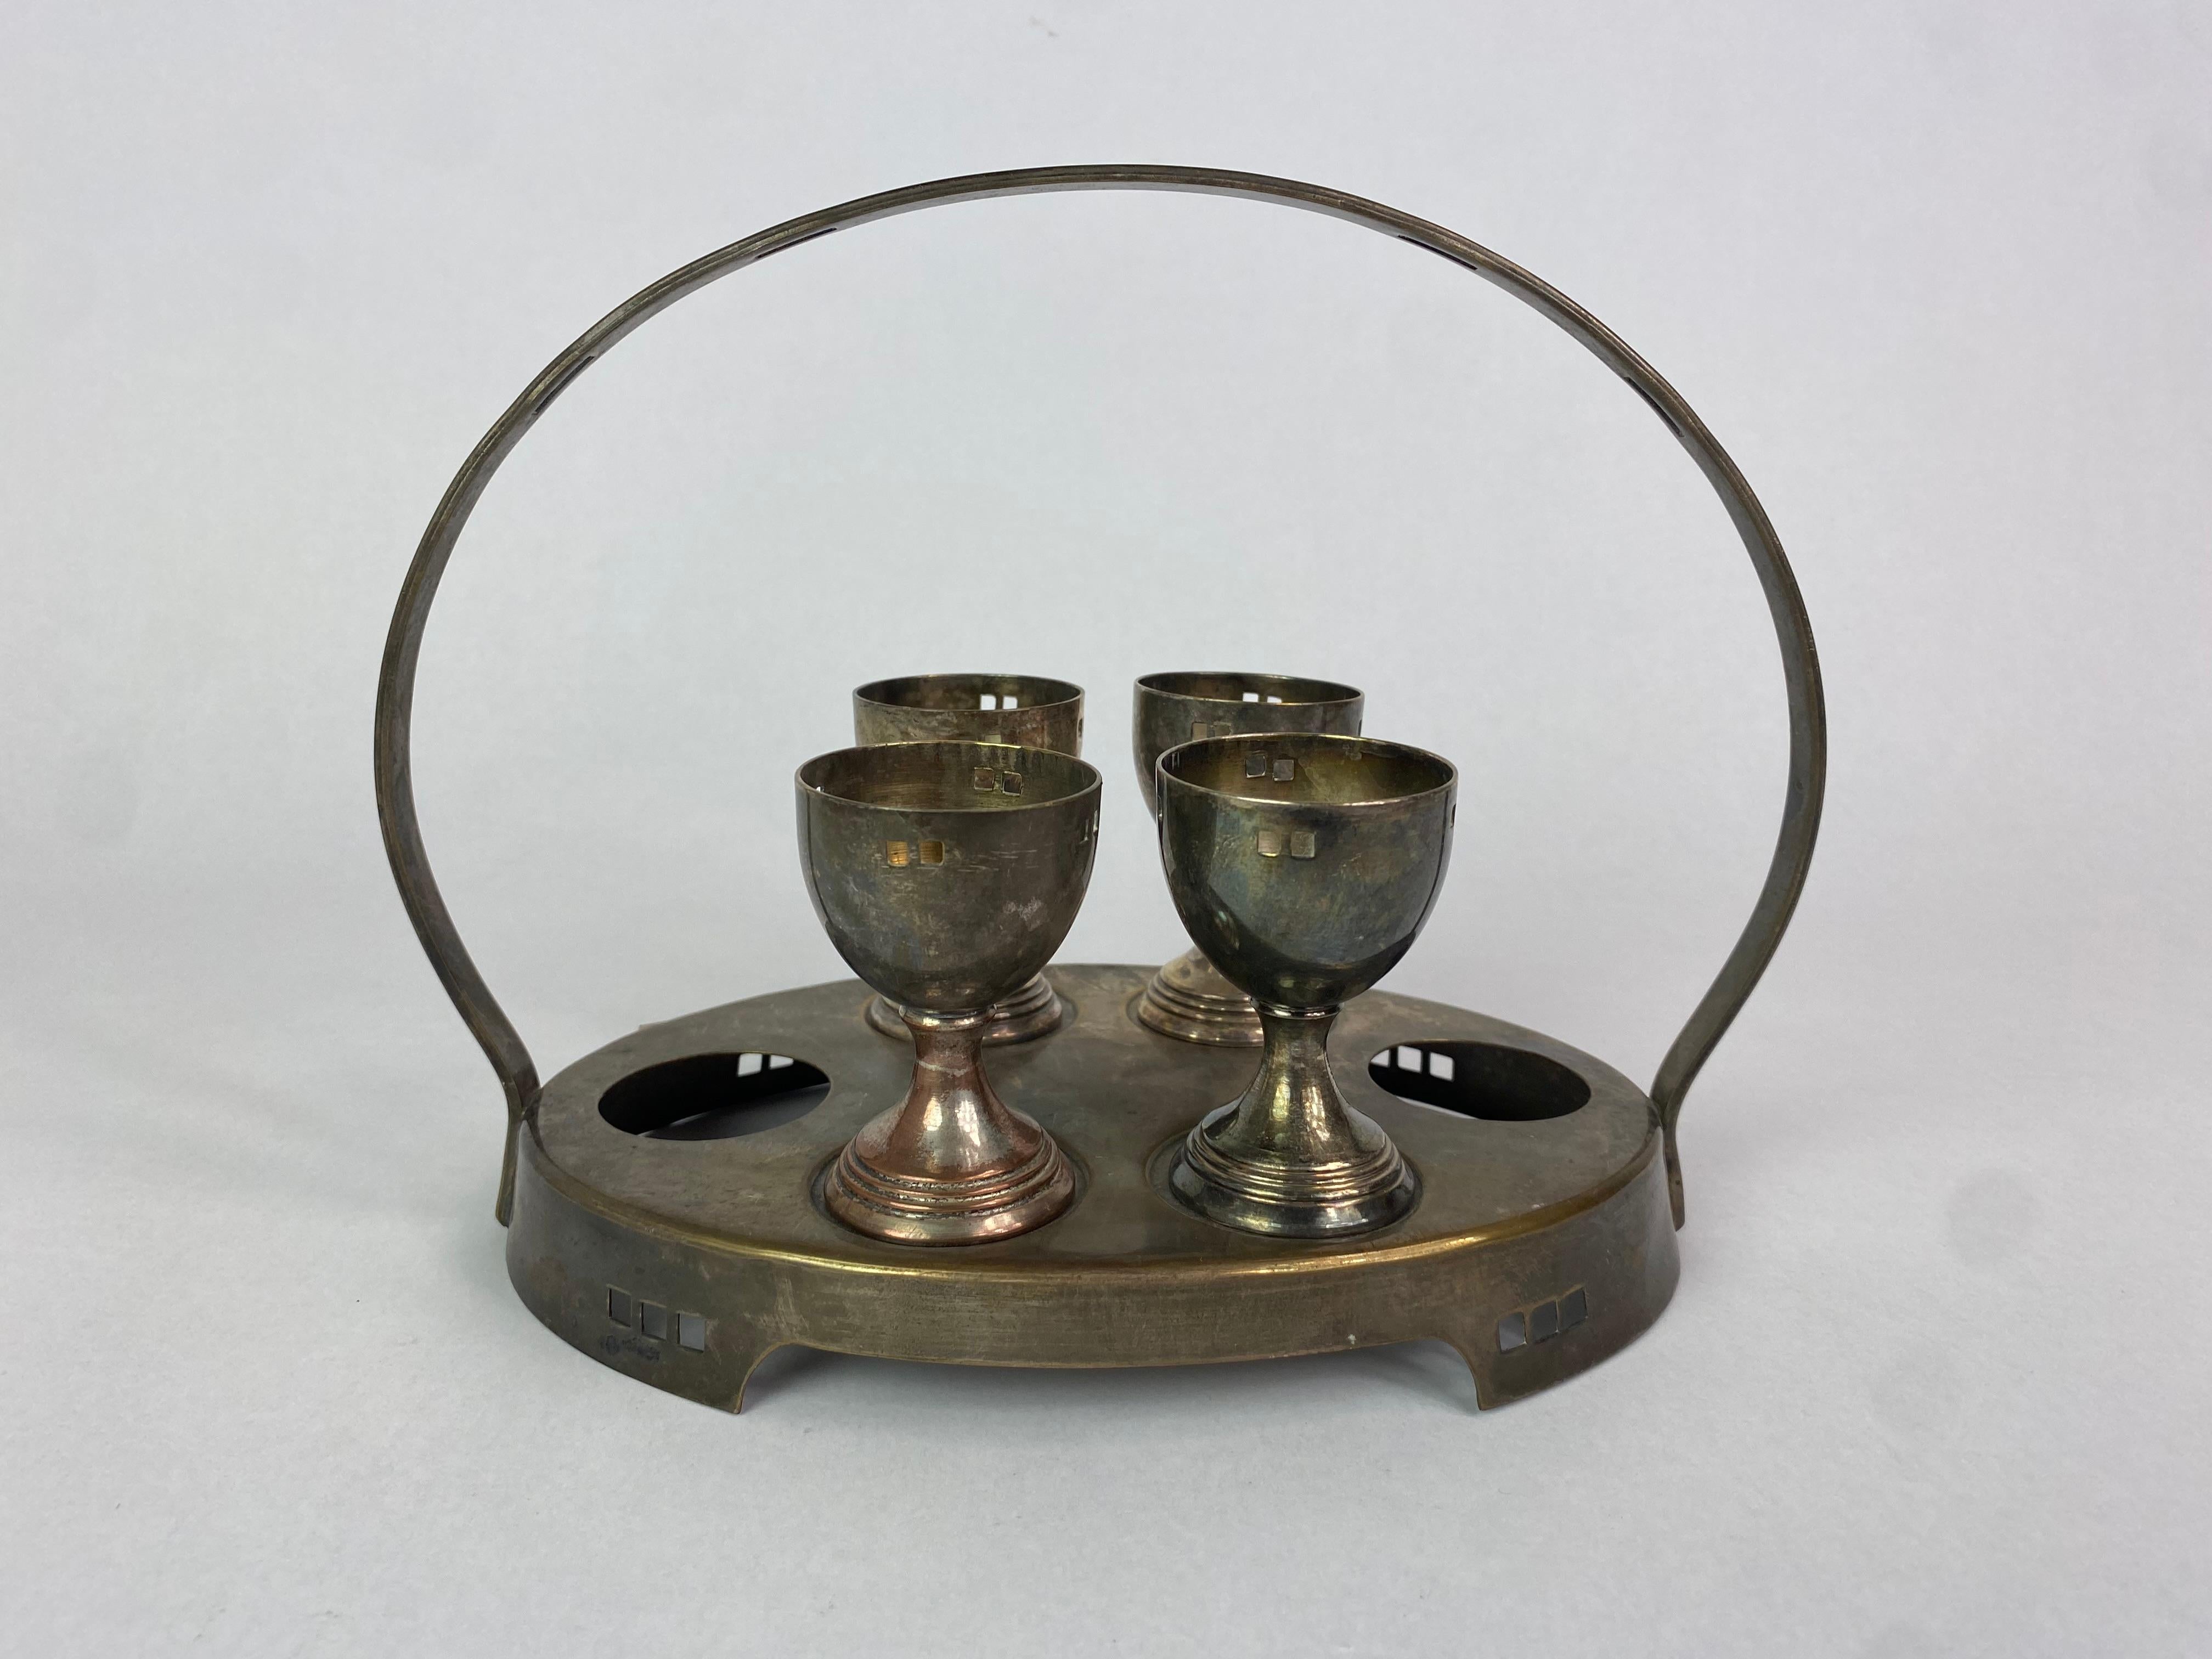 Secession Hans Ofner/Josef Hoffmann egg cups in original condition with patina. Salt and pepper cups are missing.